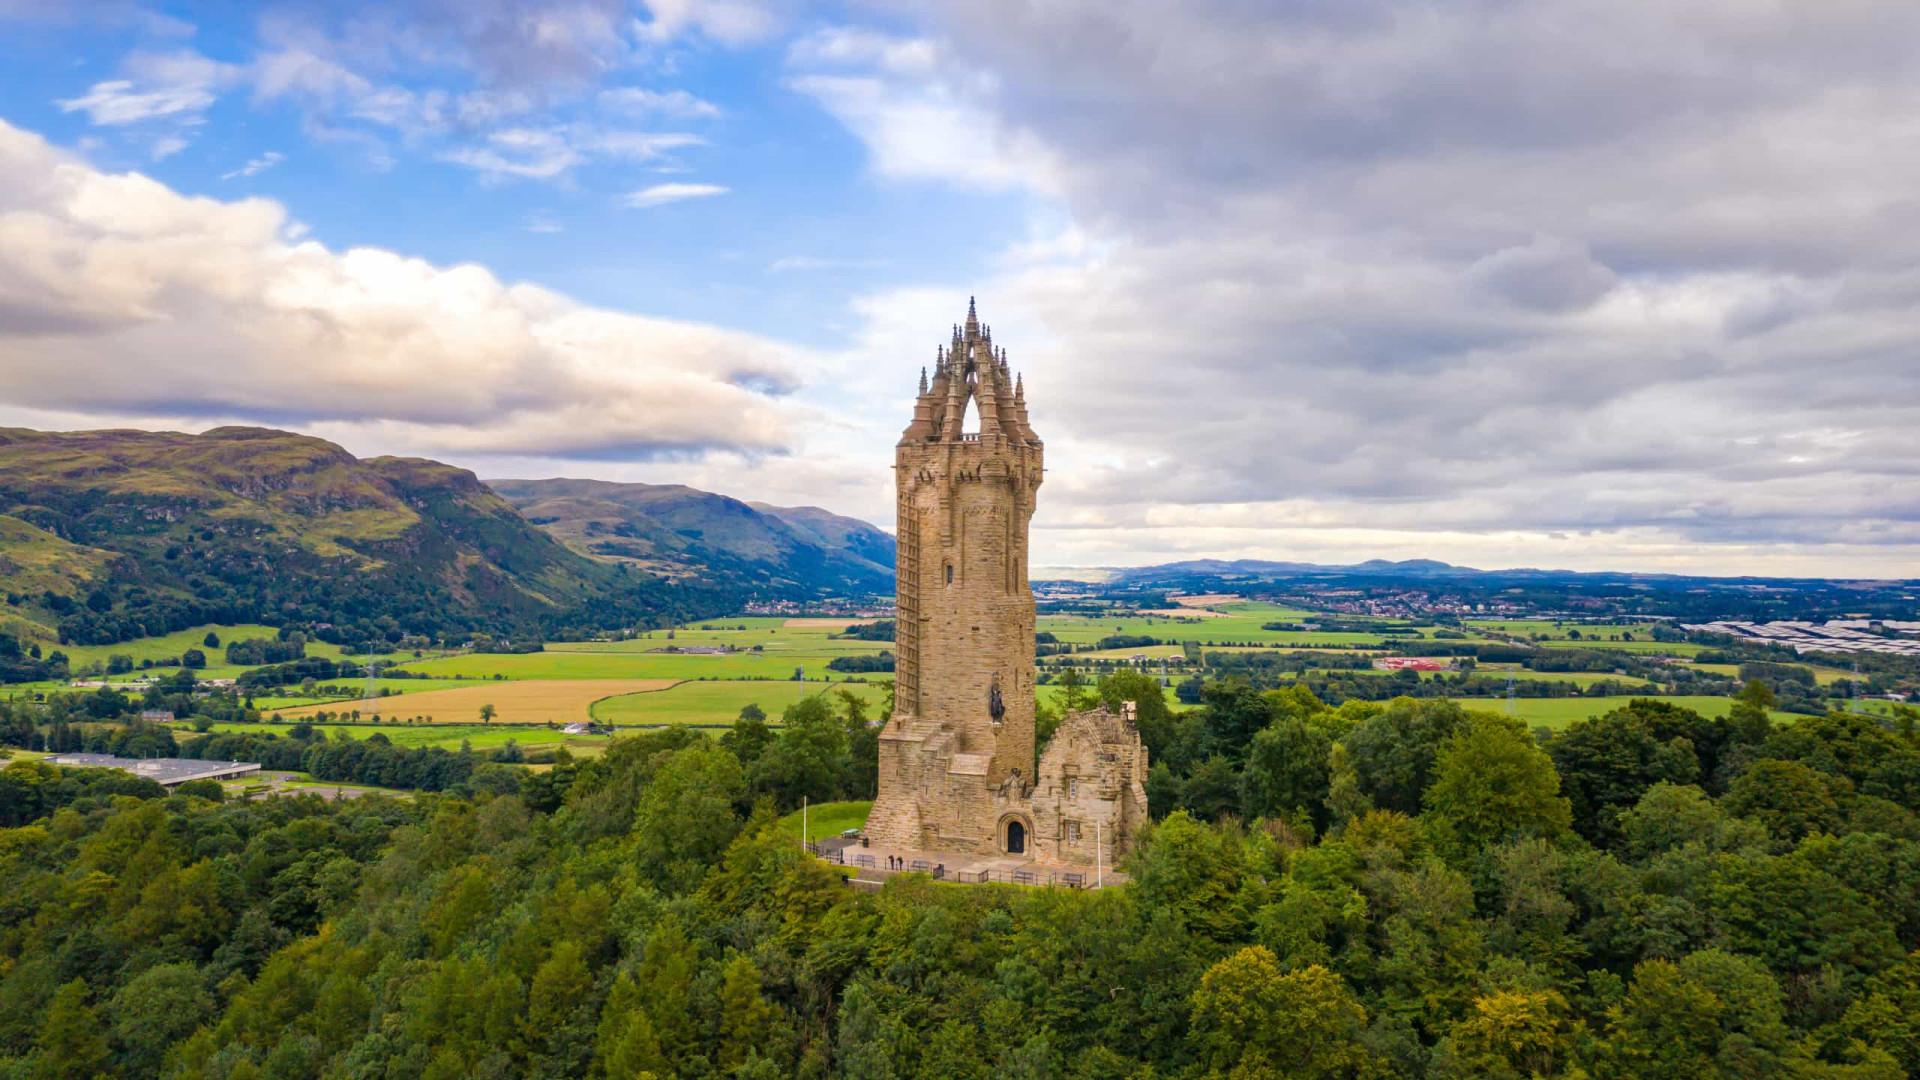 <p>The first major defeat of the English in the Wars of Scottish Independence, the Battle of Stirling Bridge was fought on September 11, 1297, and ended with victory for the armies of Andrew Moray and William Wallace. The landmark Wallace Monument (pictured) overlooking the city of Stirling commemorates the battle.</p><p>You may also like:<a href="https://www.starsinsider.com/n/273888?utm_source=msn.com&utm_medium=display&utm_campaign=referral_description&utm_content=627984en-za"> Slithering serpents! Australia’s deadliest snakes</a></p>